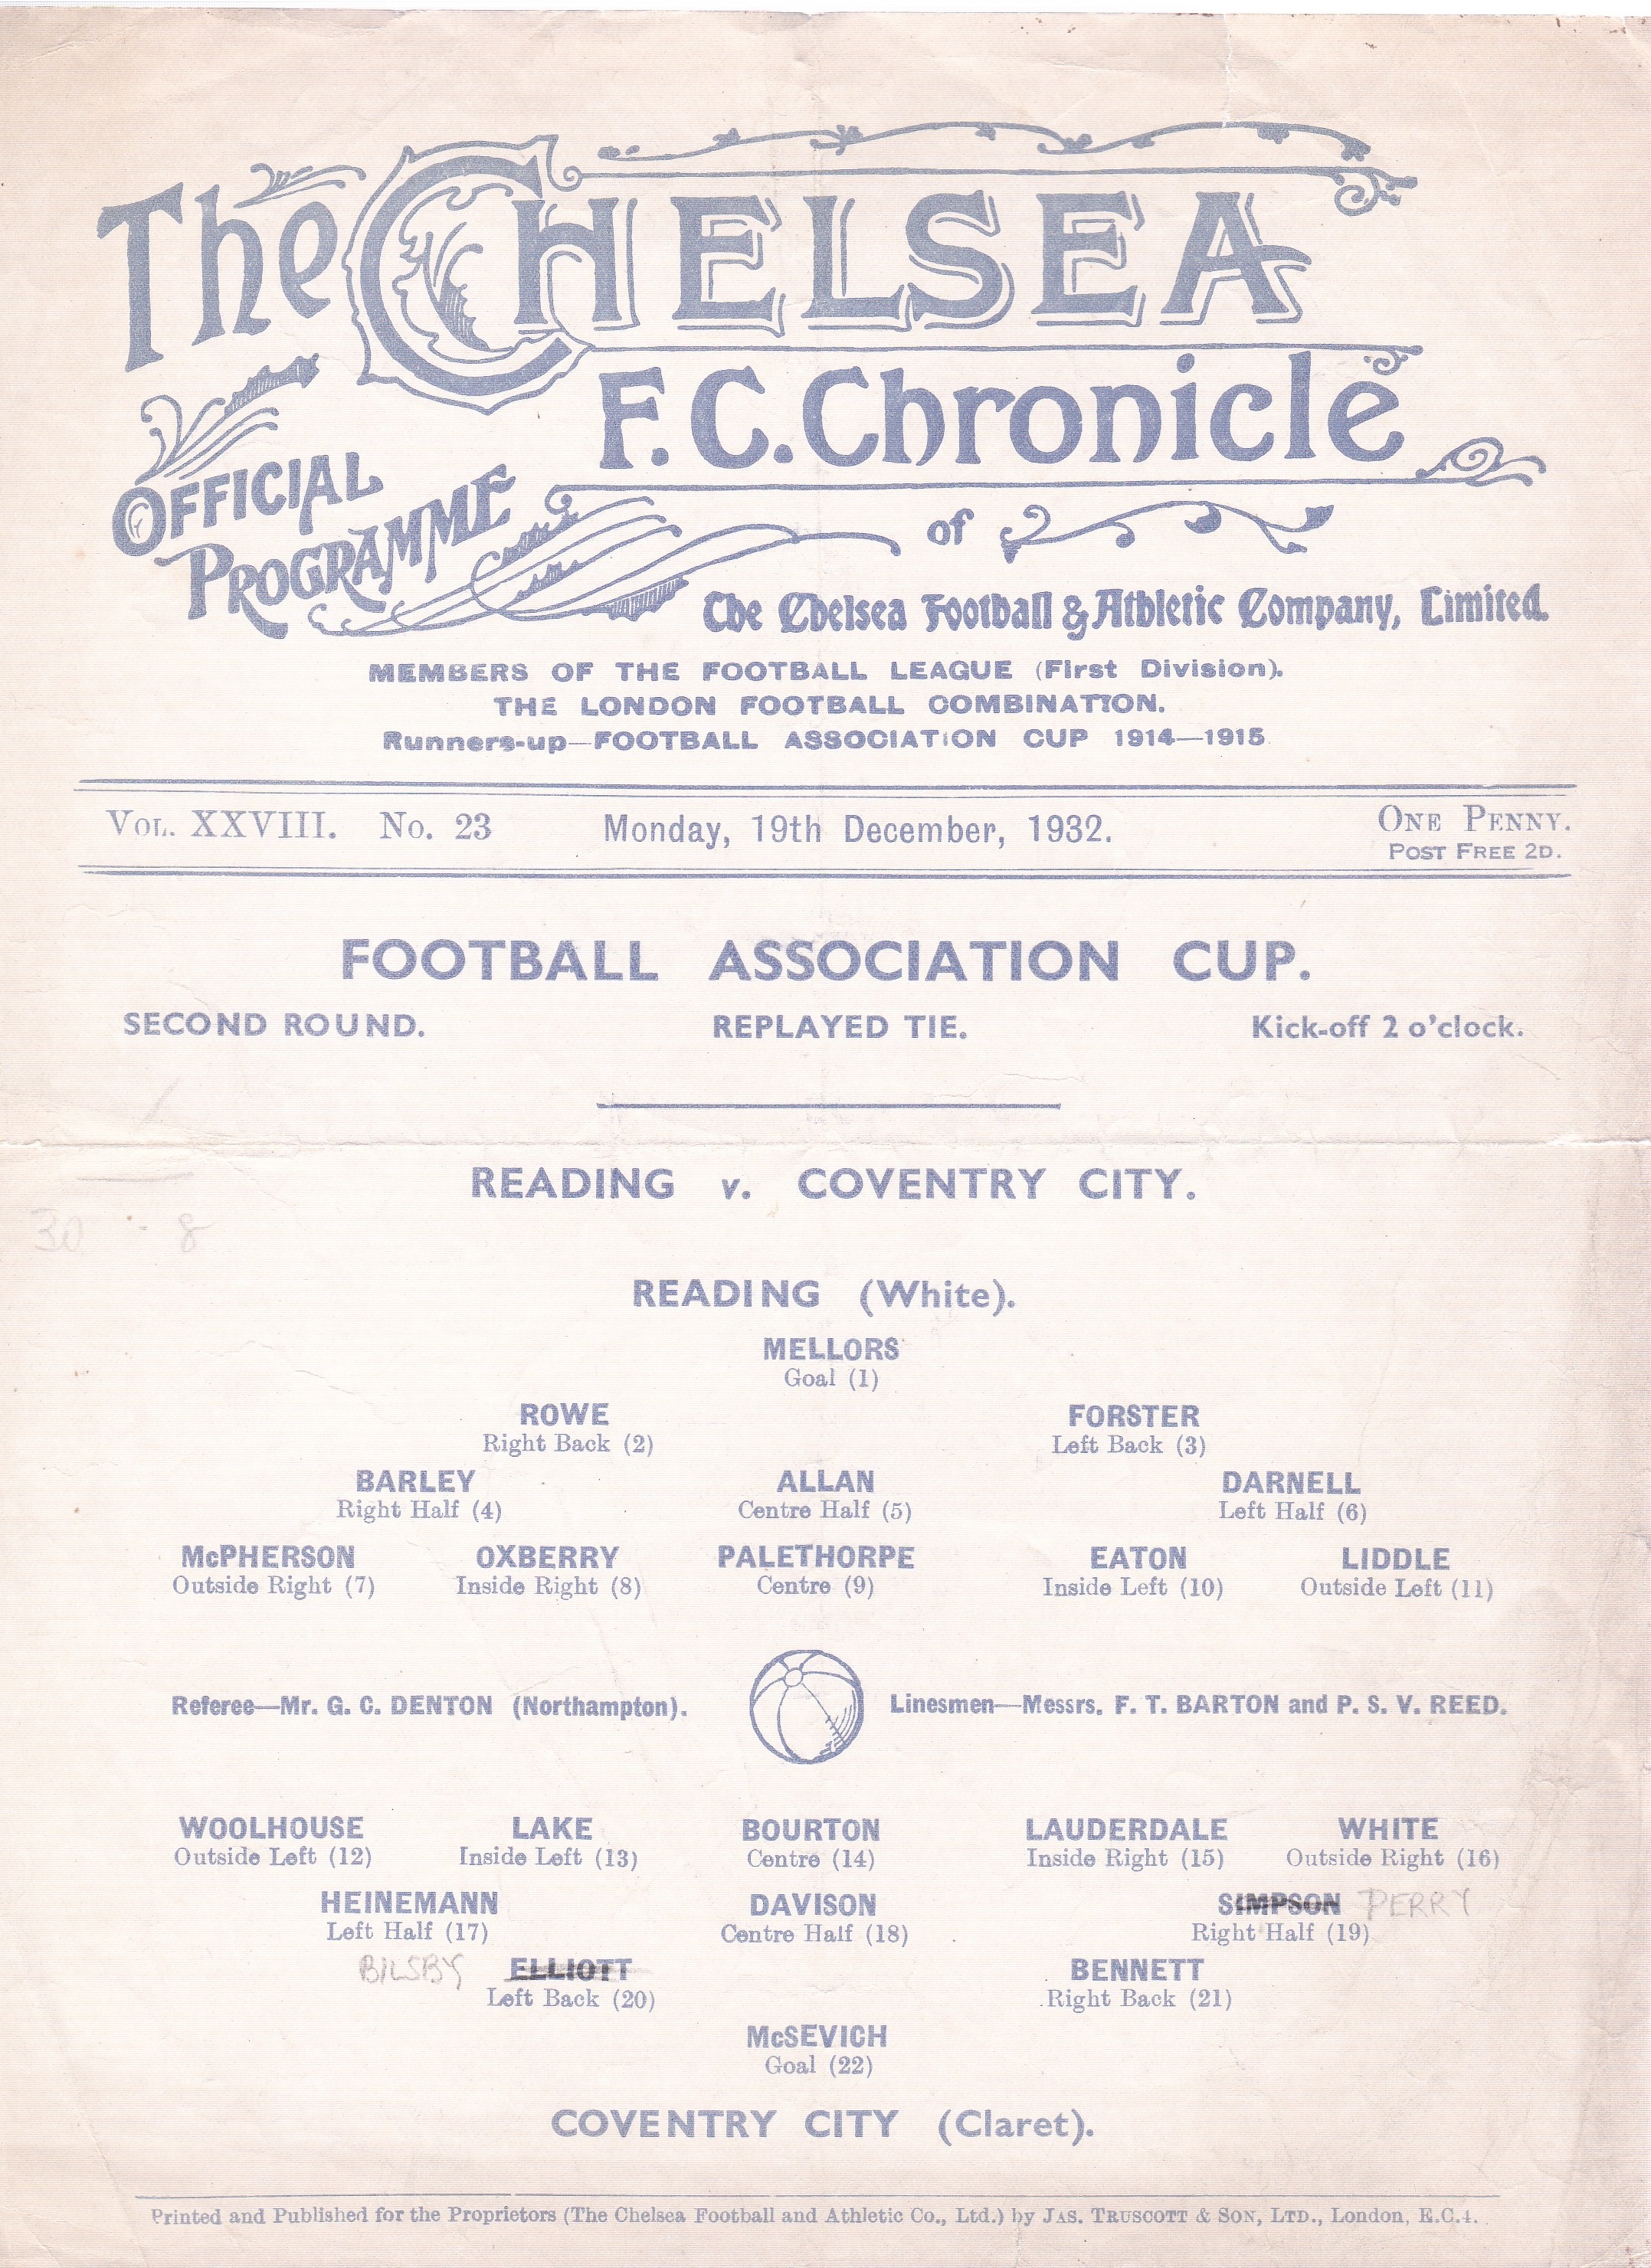 Stamford Bridge 1932 December 19th Reading v Coventry City Football Association Cup 2nd round replay